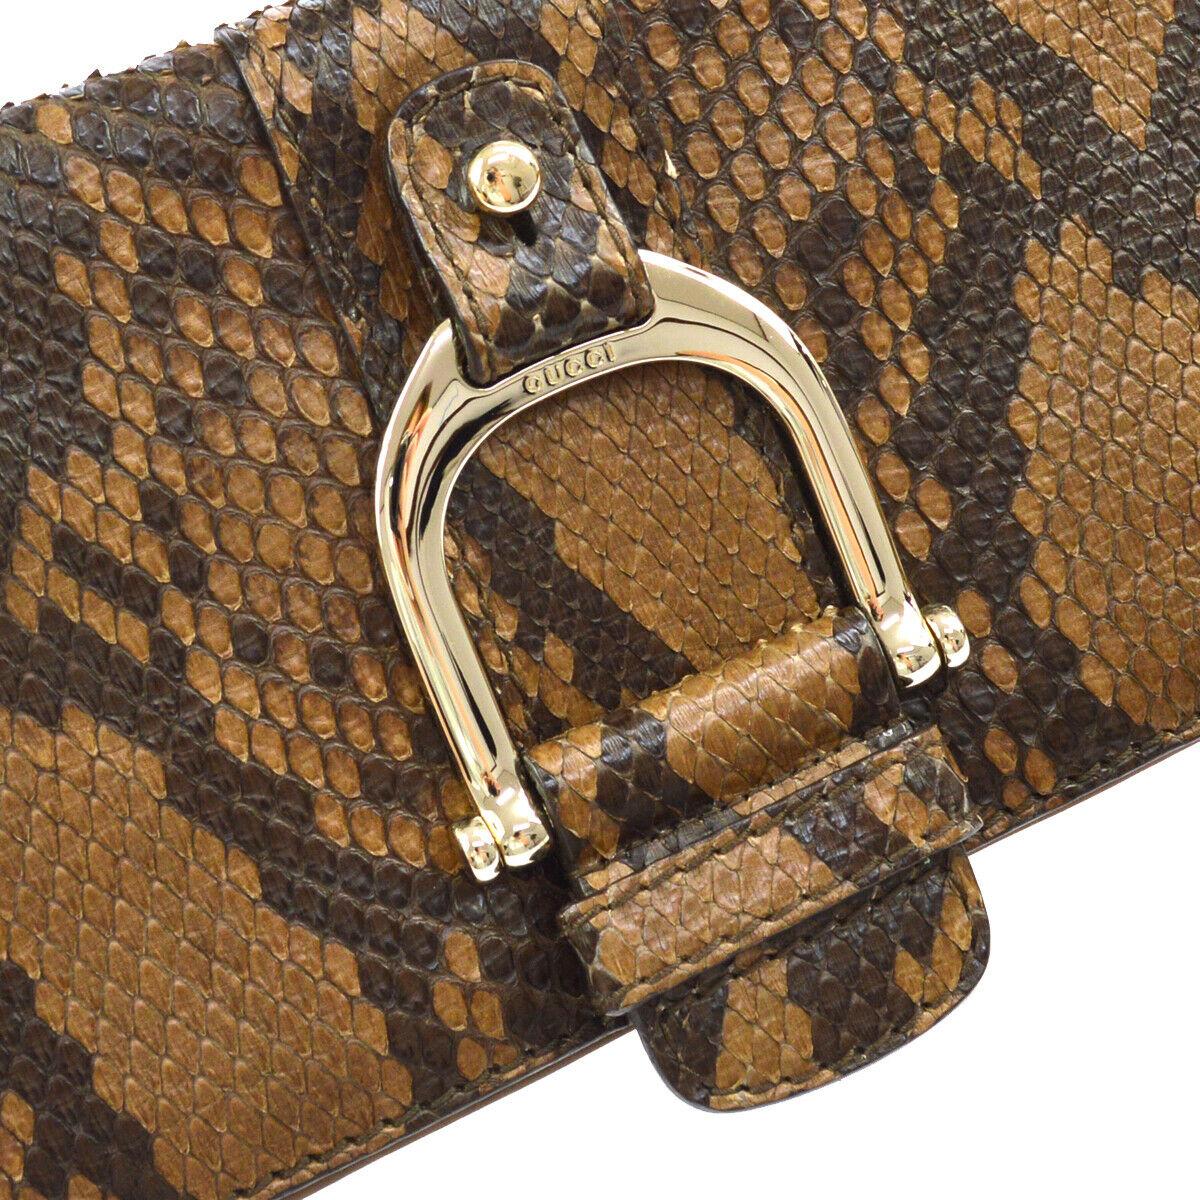 
Snakeskin
Leather
Gold tone hardware
Canvas lining
Snap closure at front flap
Made in Italy
Measures 11.5